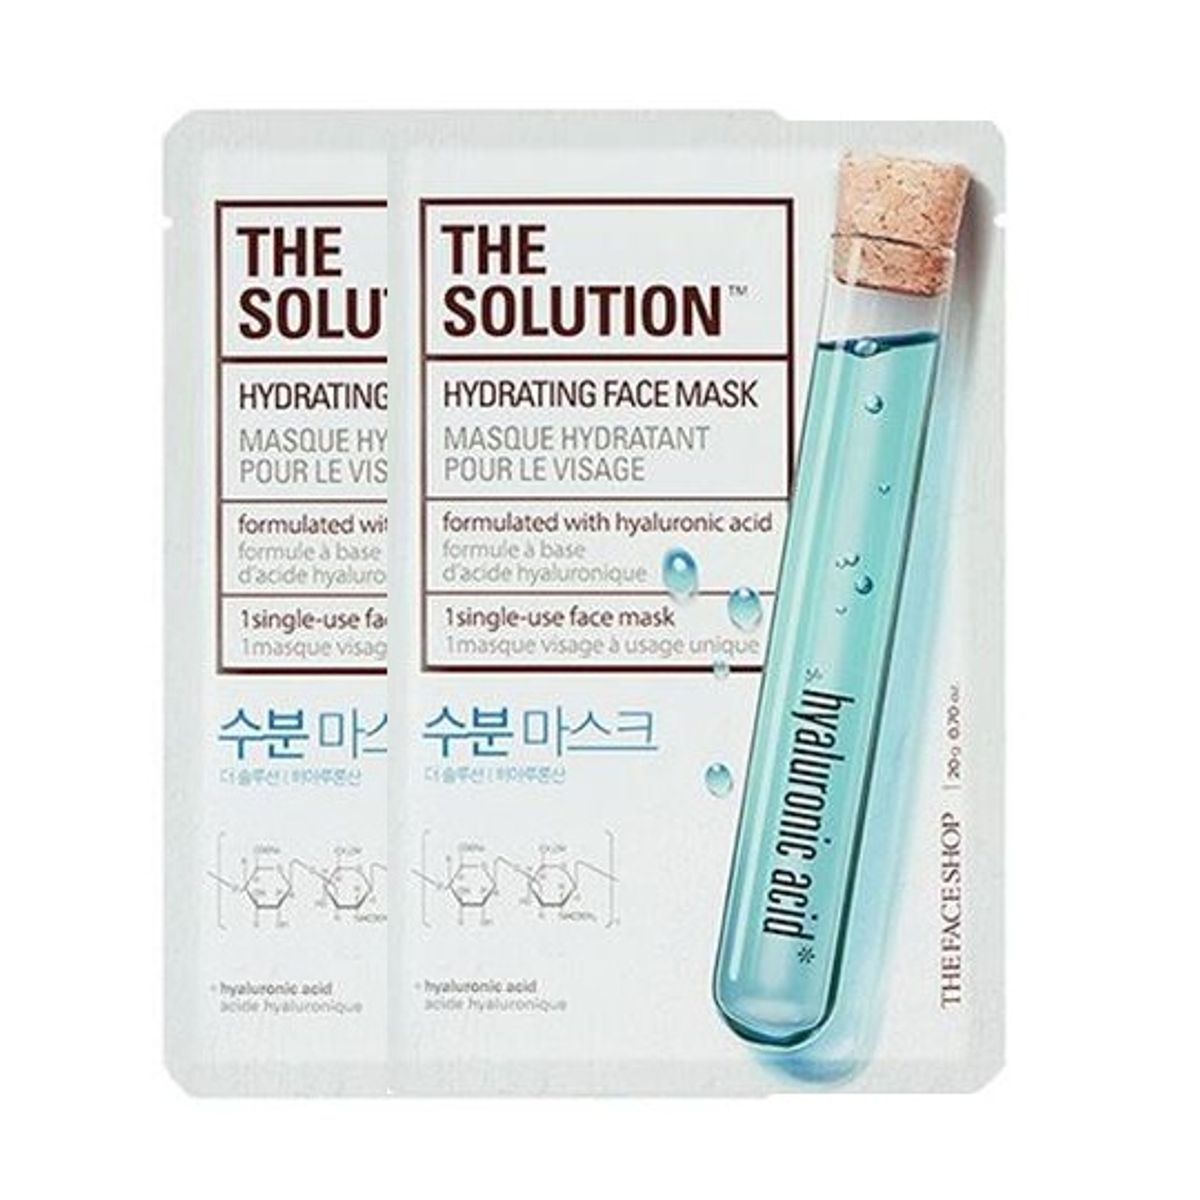 gift-mat-na-cung-cap-am-the-solution-hydrating-face-mask-2-sheets-1